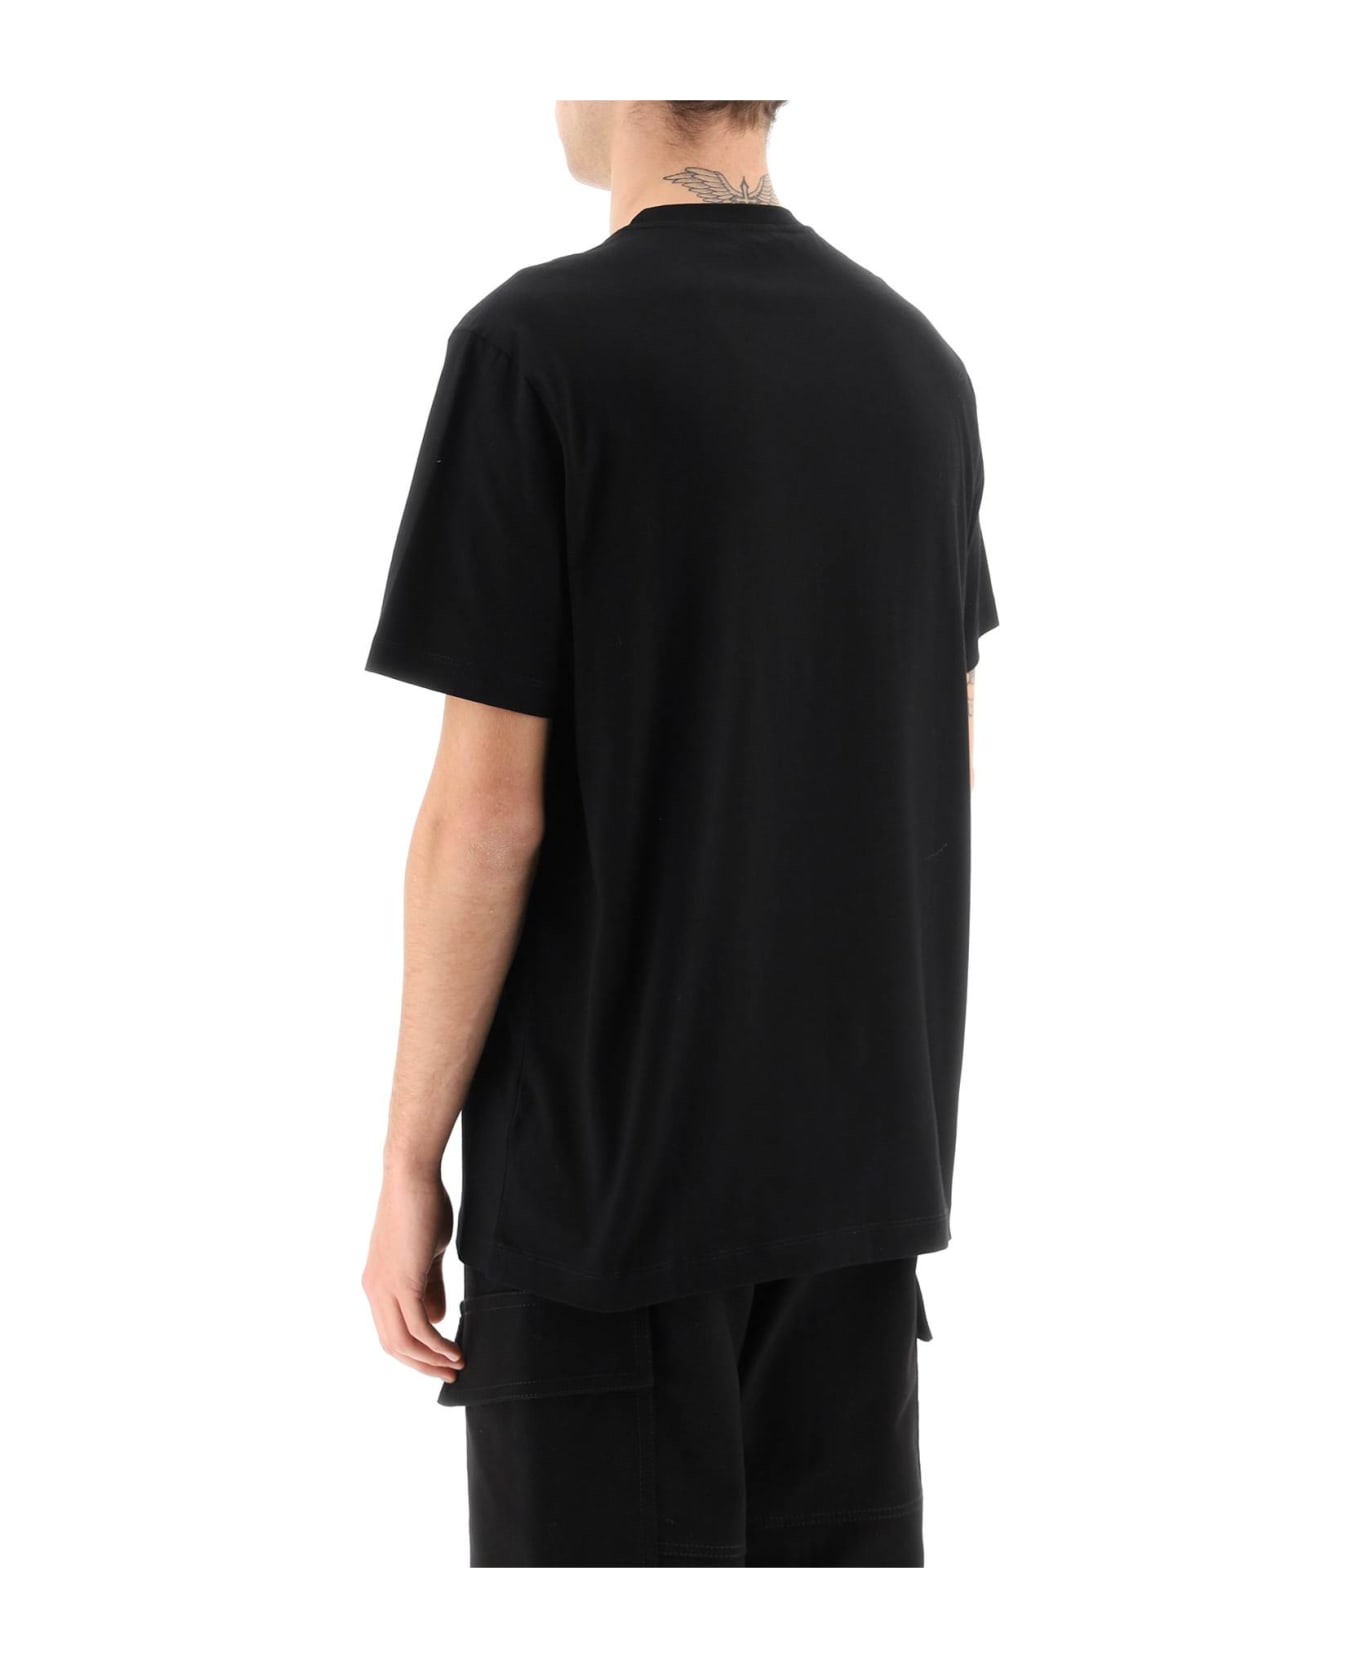 Versace Black T-shirt With Red Embroidered Sponge Logo - Nero